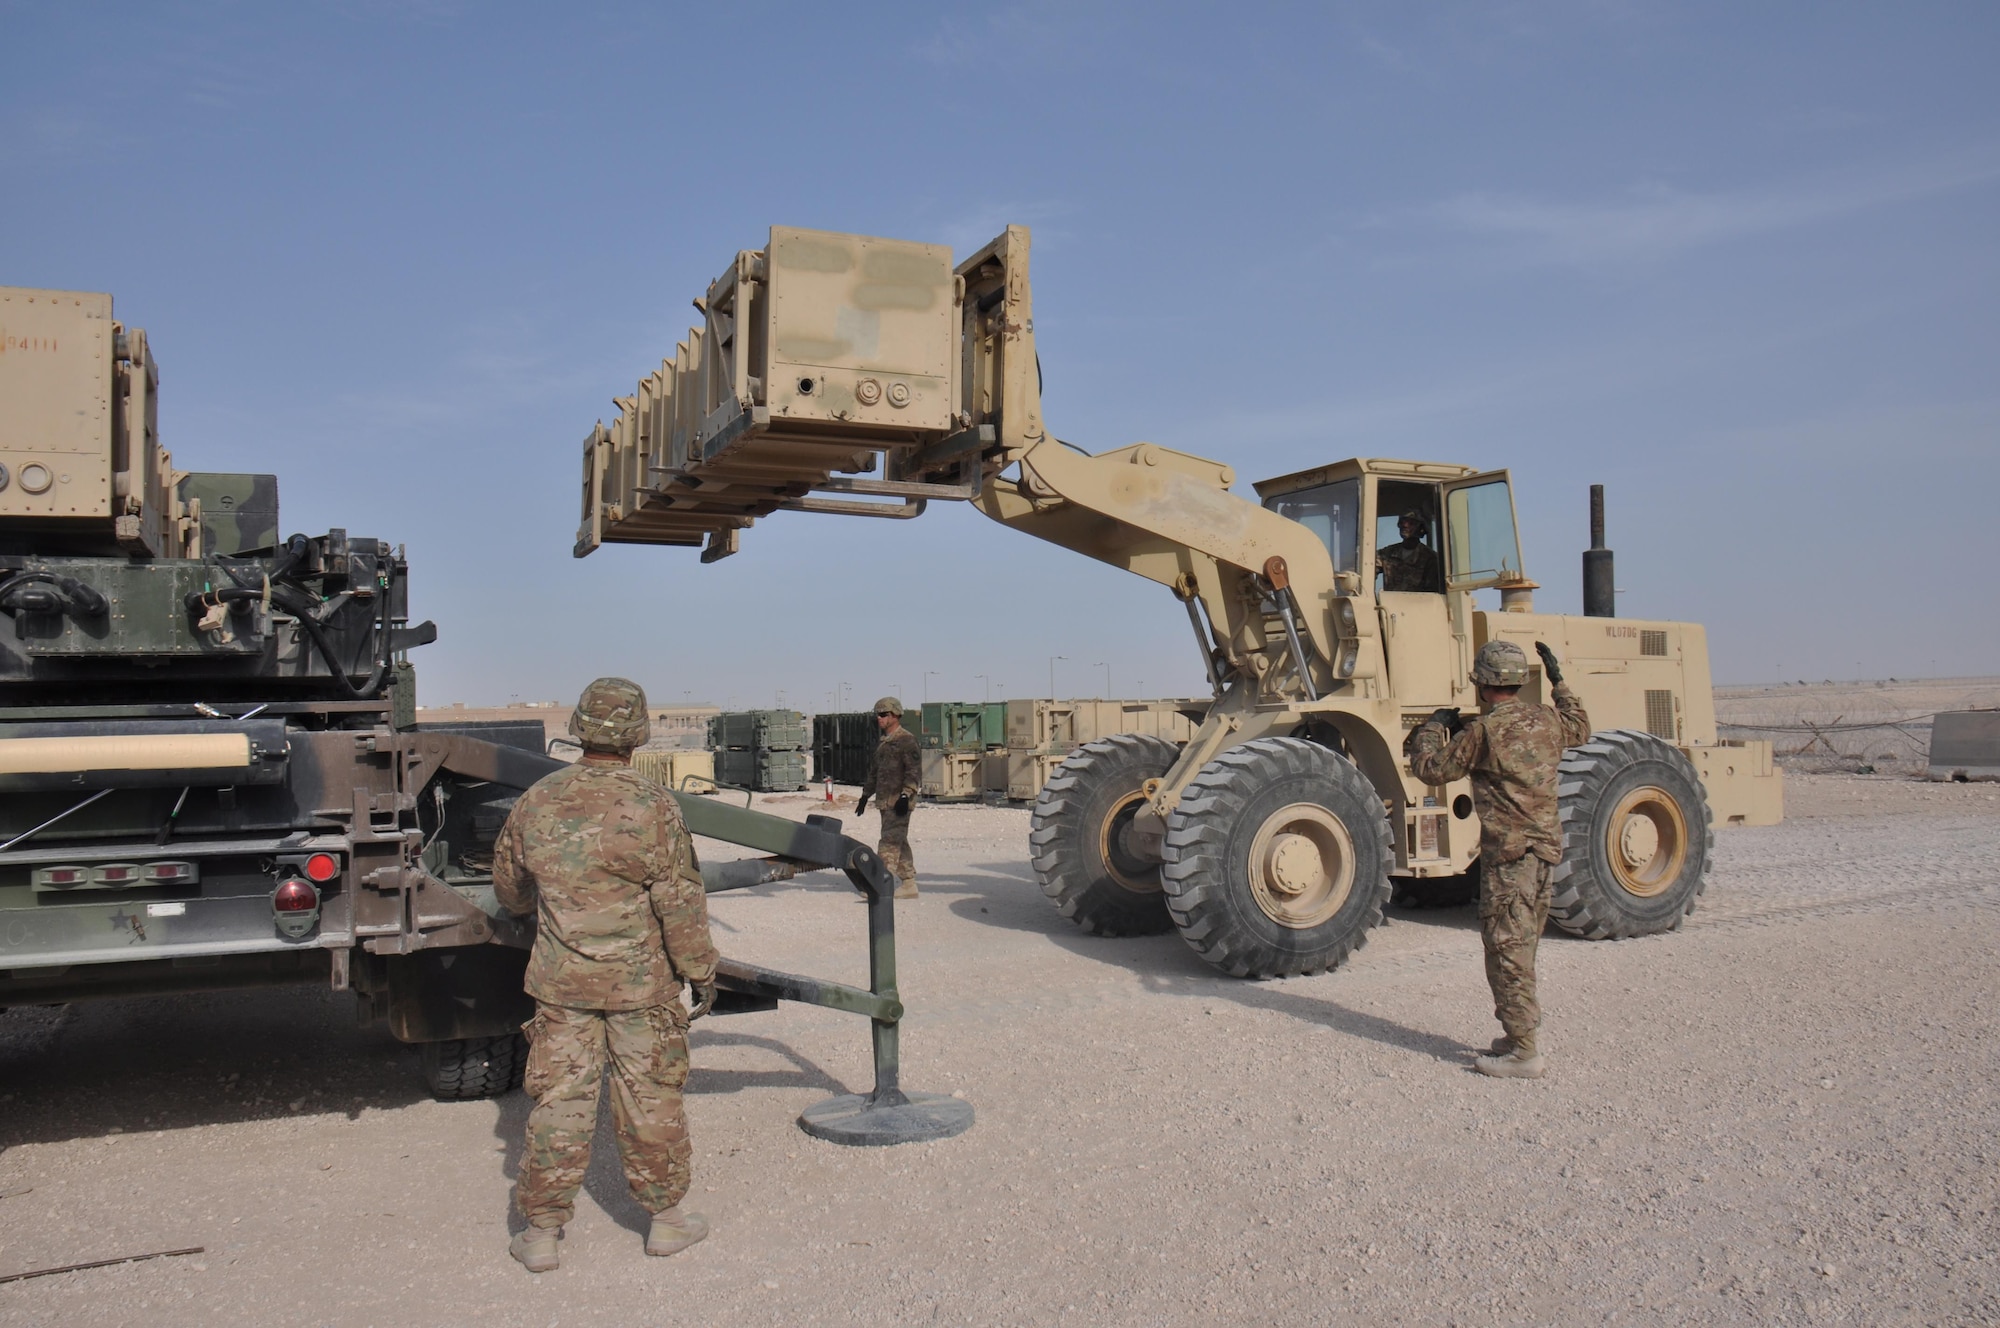 1-62 Delta Battery Air Defense Artillery Regiment Soldiers direct a forklift into position during a missile reloading training exercise at Al Udeid Air Base, Qatar Mar. 4. The Patriot missiles at AUAB protect the base from a variety of airborne threats including tactical ballistic missiles and drones.  (U.S. Air Force photo by Tech. Sgt. James Hodgman/Released)